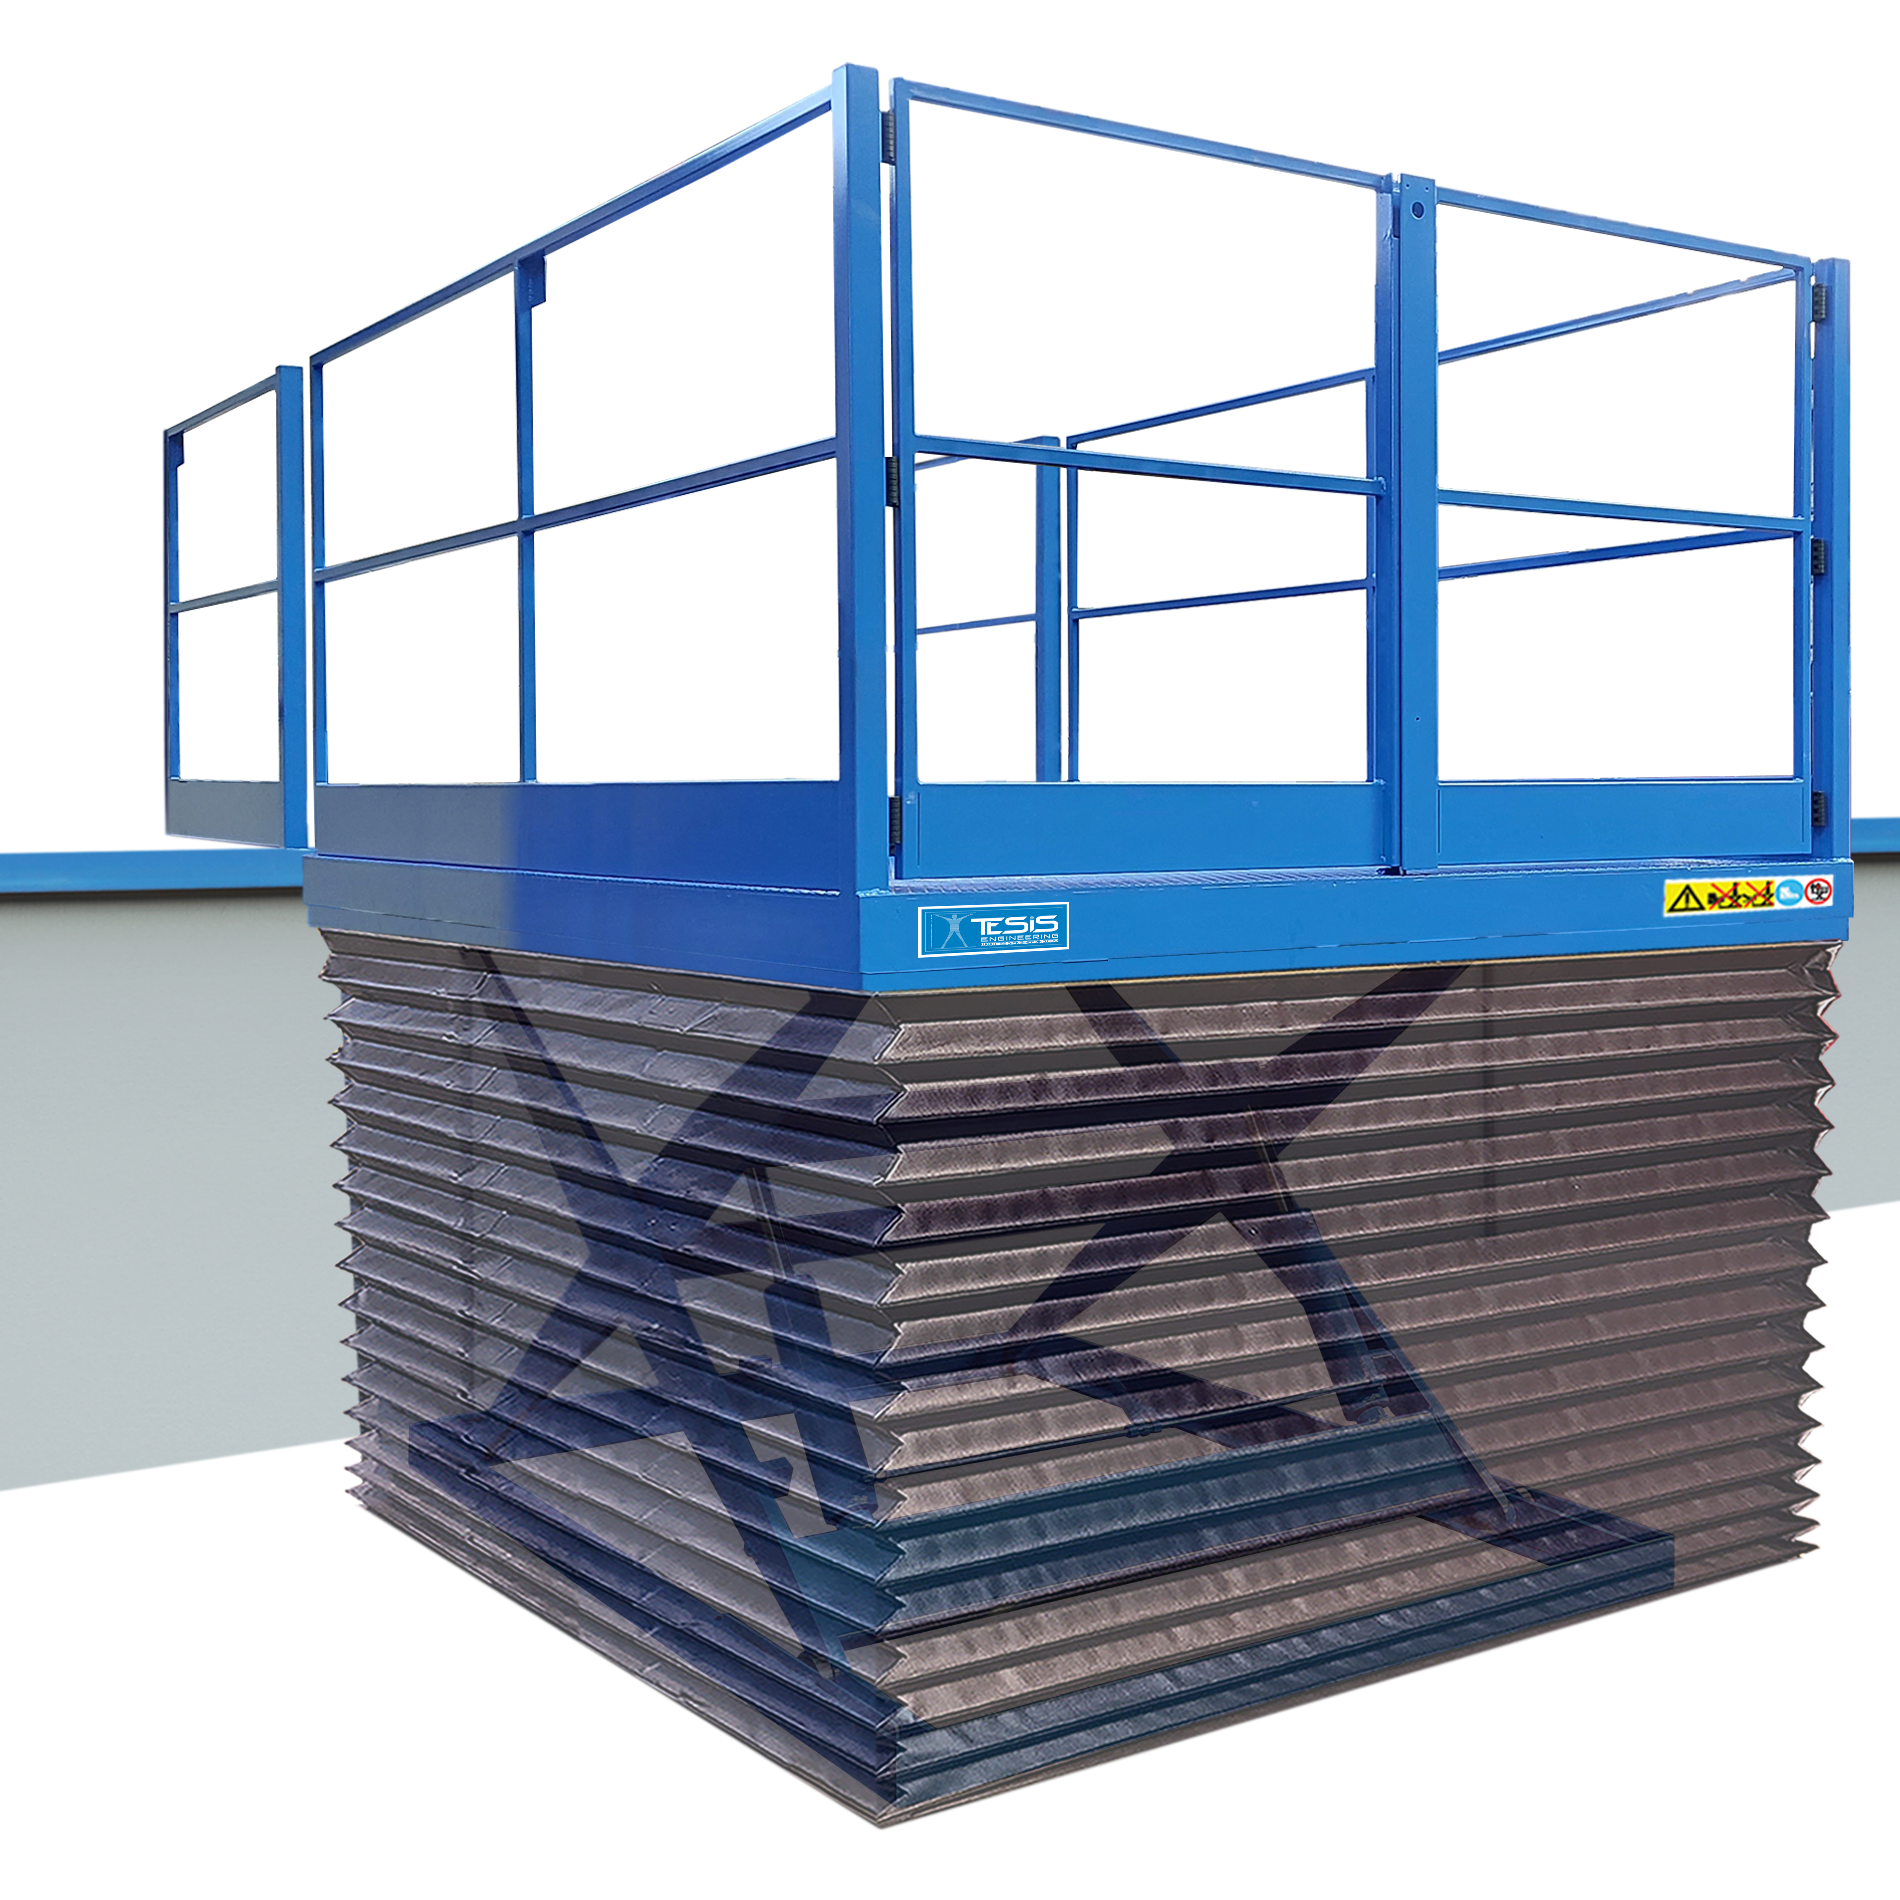 Pit mounted scissor lift table for  with fixed parapet and double access gate, lifting platforms for loading docks, scissor dock lifts, loading dock lifts, good lifts